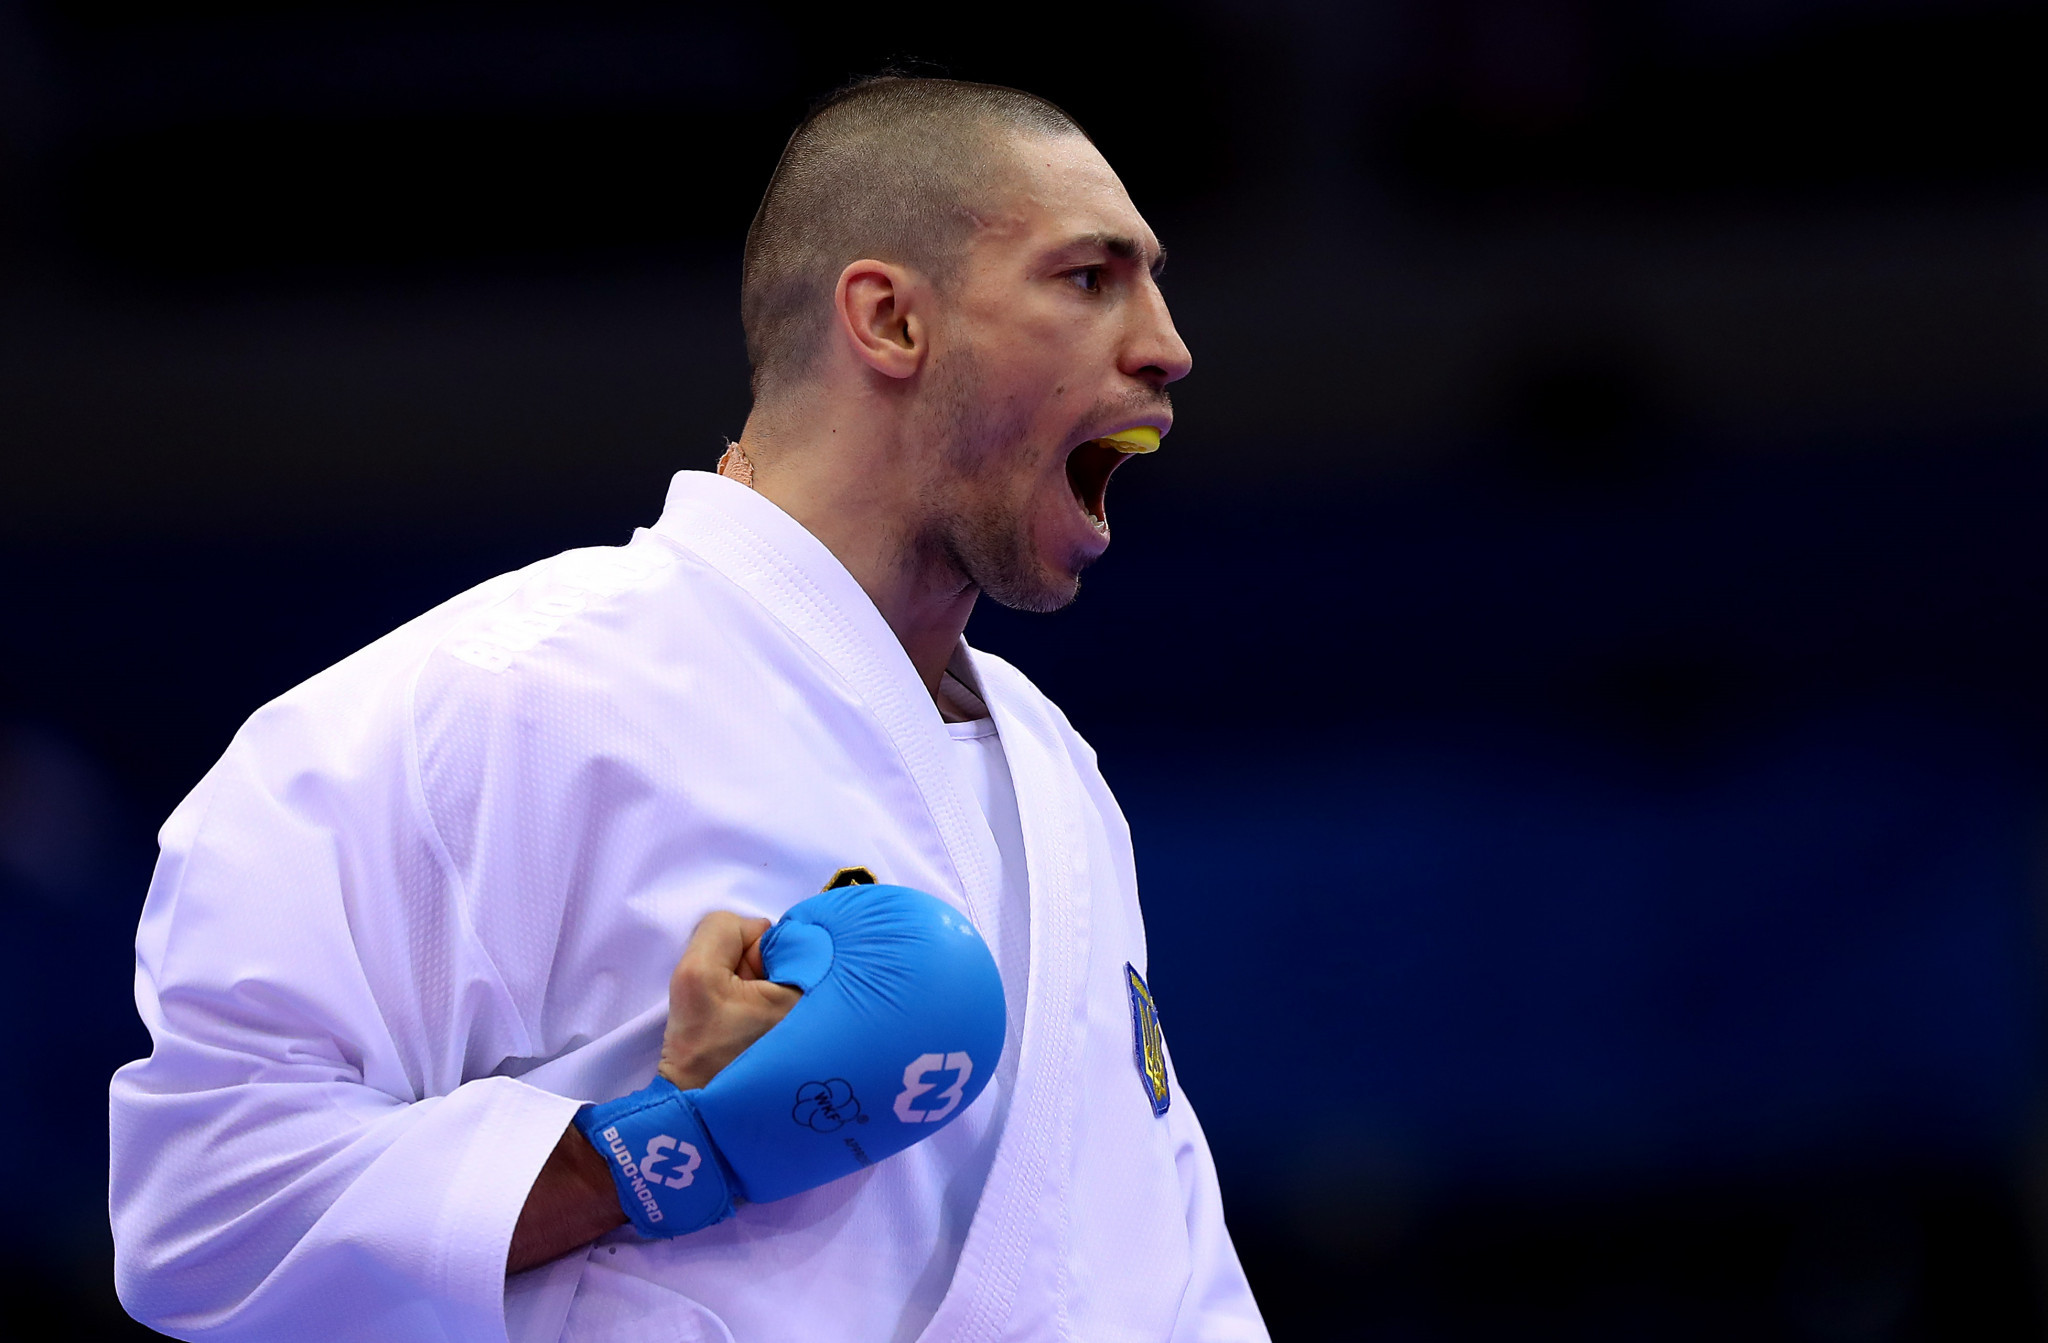 Exclusive: Ukraine’s karate star claims WKF helping Russia to promote "propaganda of terrorism" after return